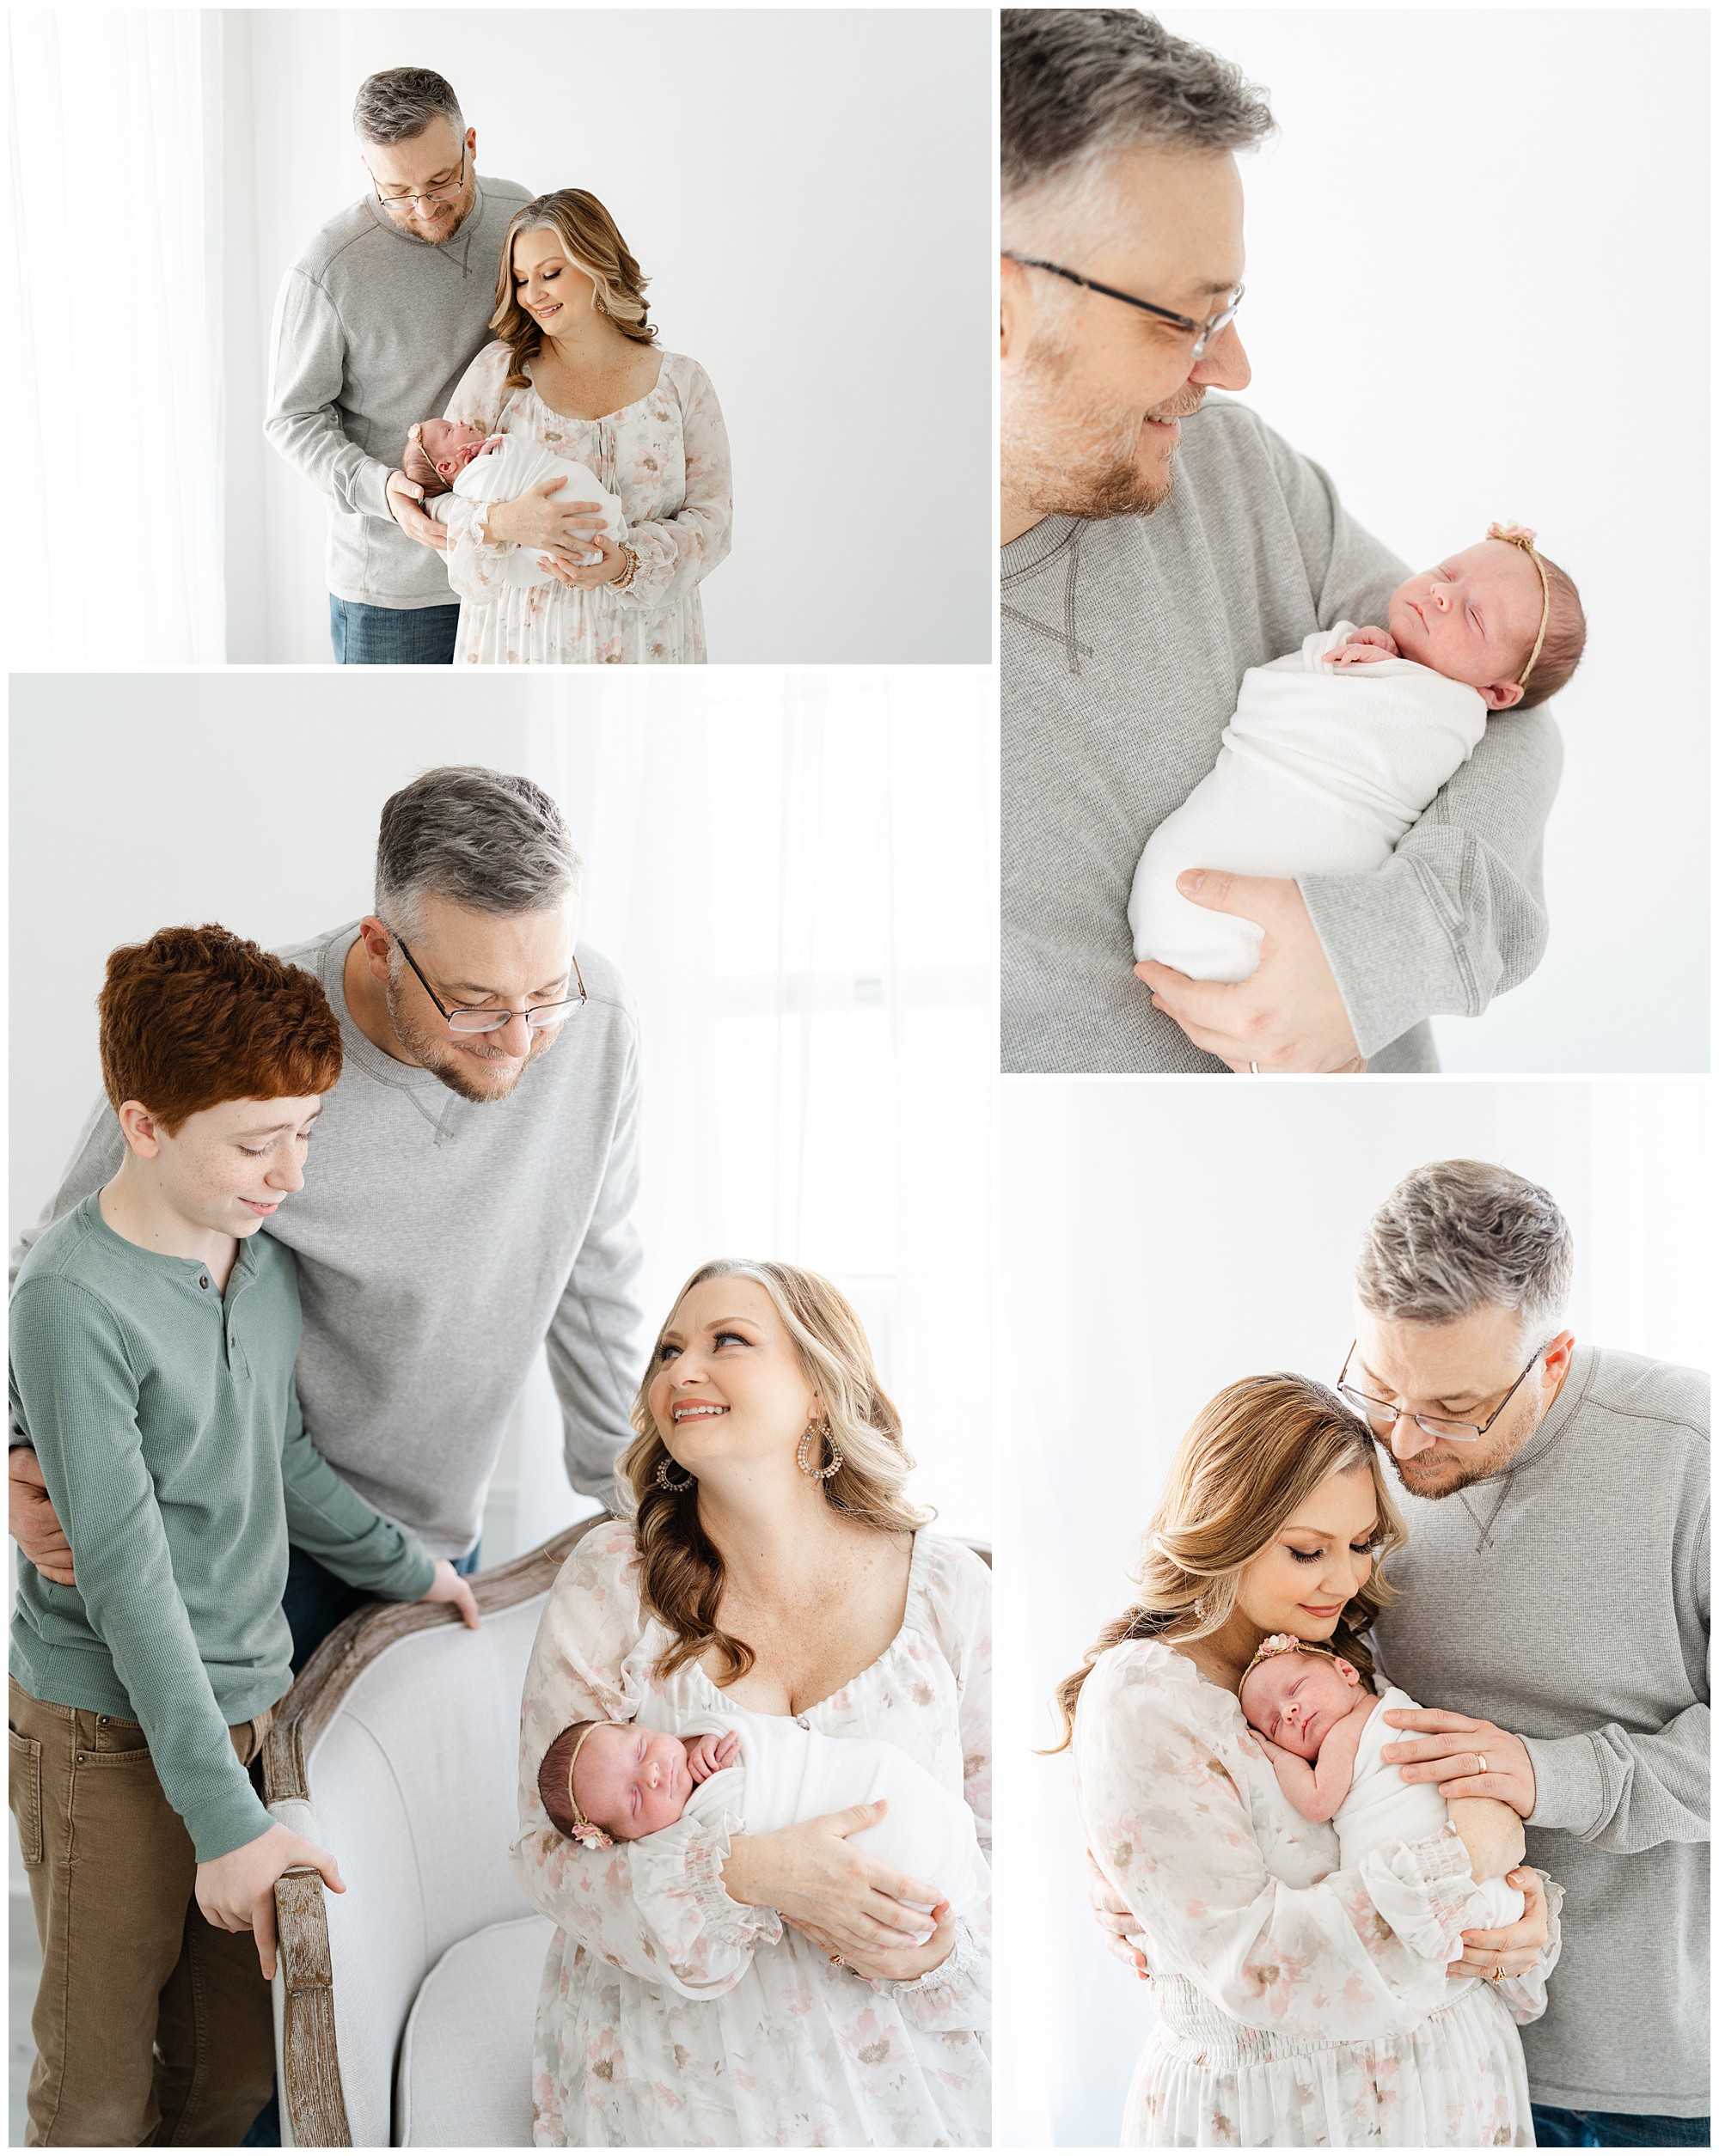 Portraits of parents with their son and newborn daughter taken by an Atlanta newborn photographer.